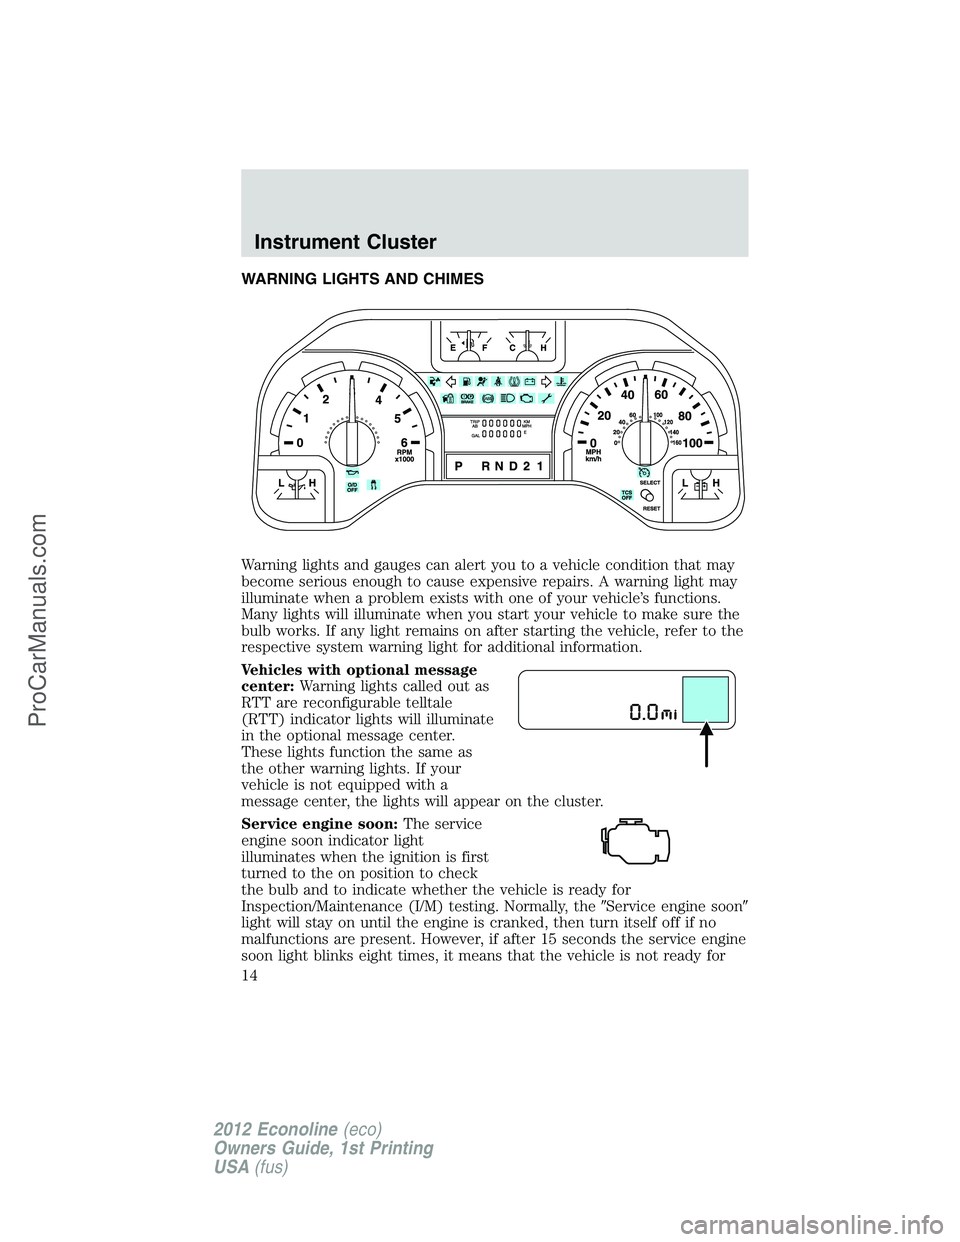 FORD E-350 2012  Owners Manual WARNING LIGHTS AND CHIMES
Warning lights and gauges can alert you to a vehicle condition that may
become serious enough to cause expensive repairs. A warning light may
illuminate when a problem exists